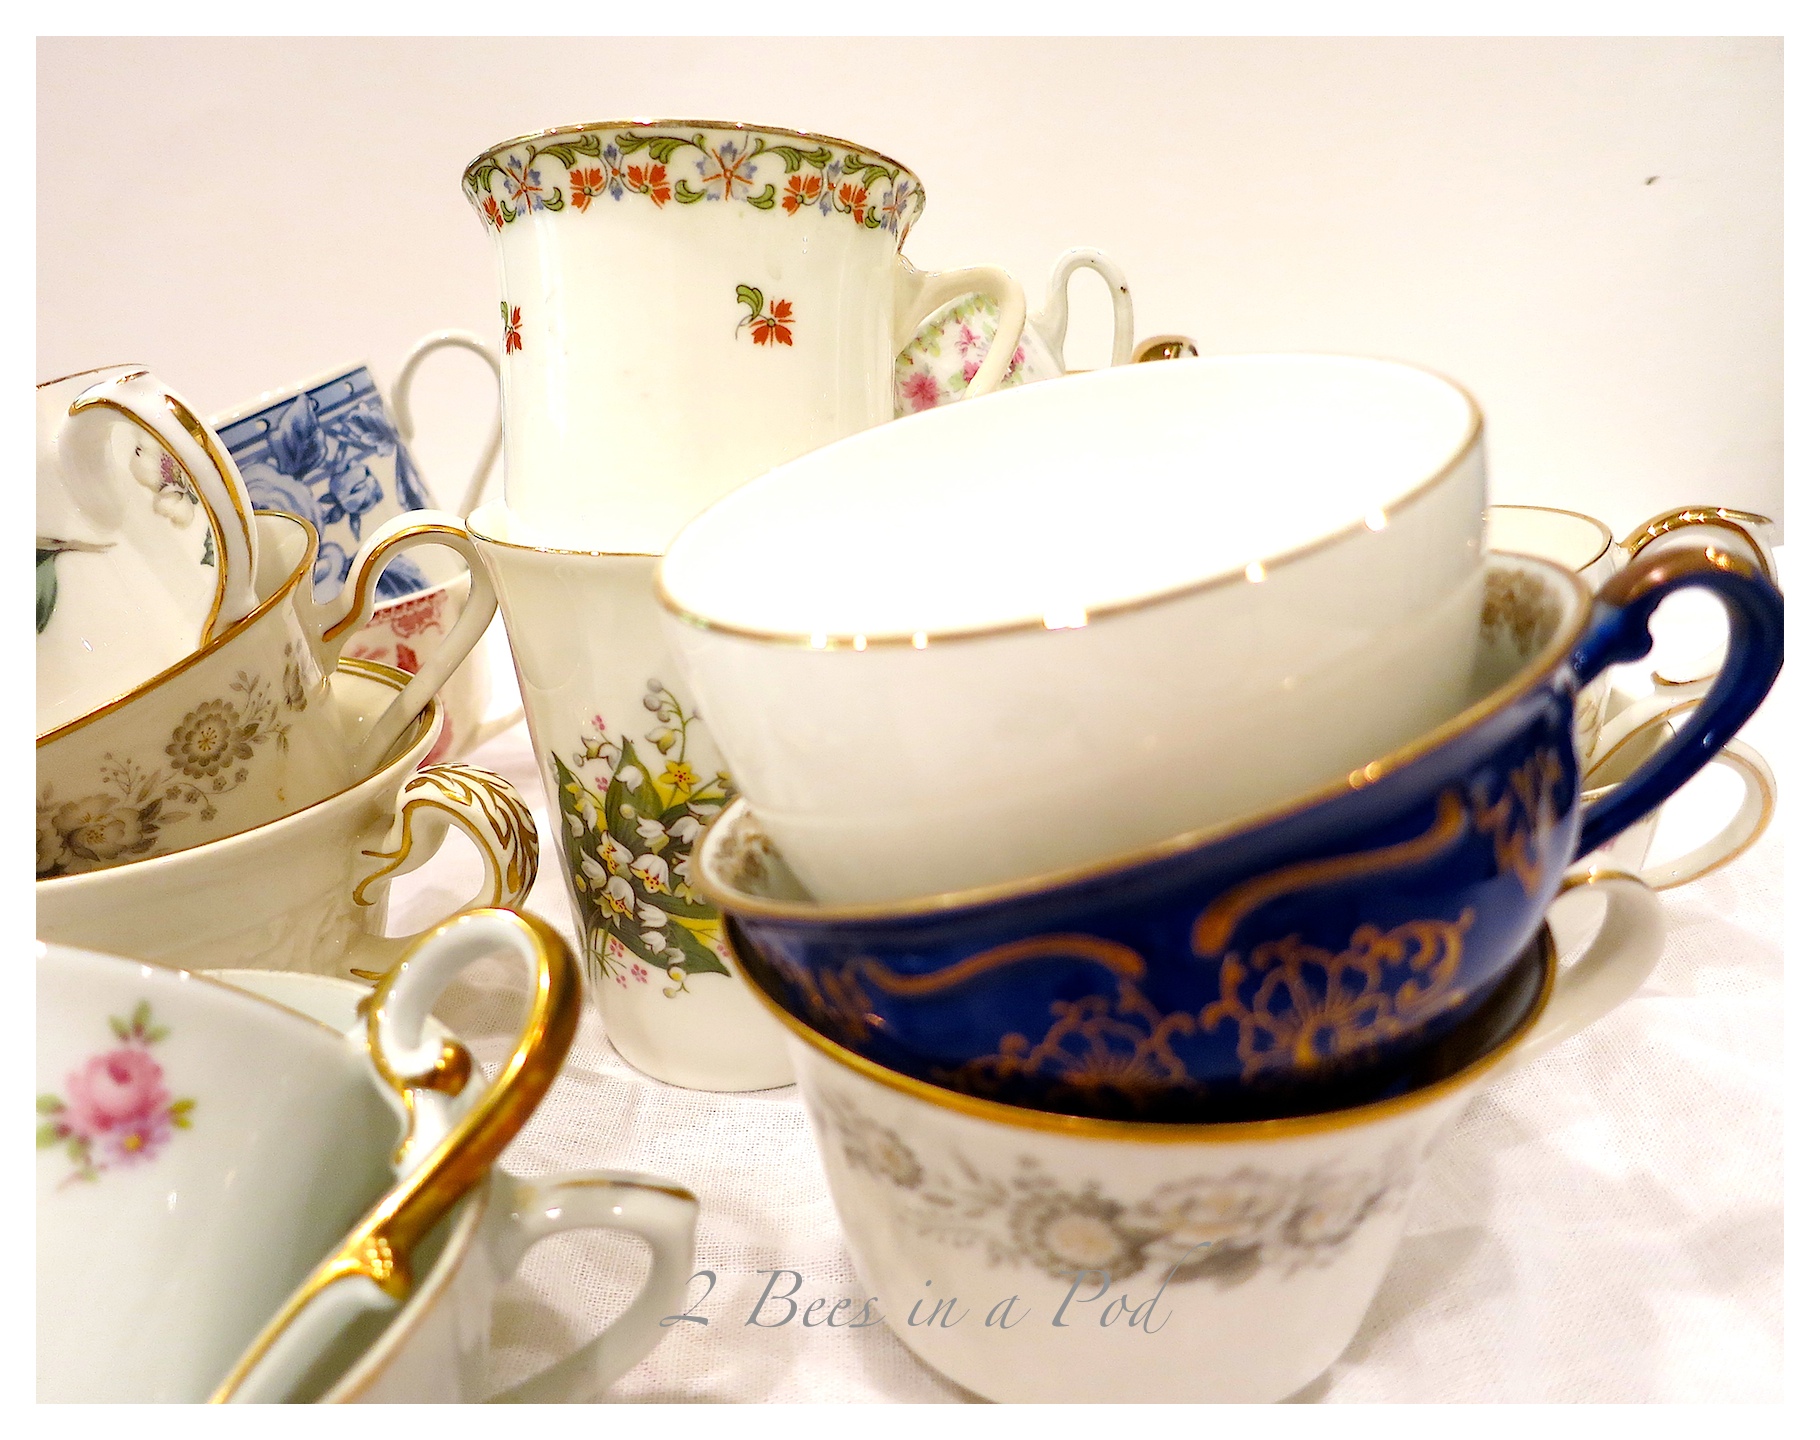 Just 2 easy steps to create your own DIY Bridal Shower Party Favor Teacup Candles. 